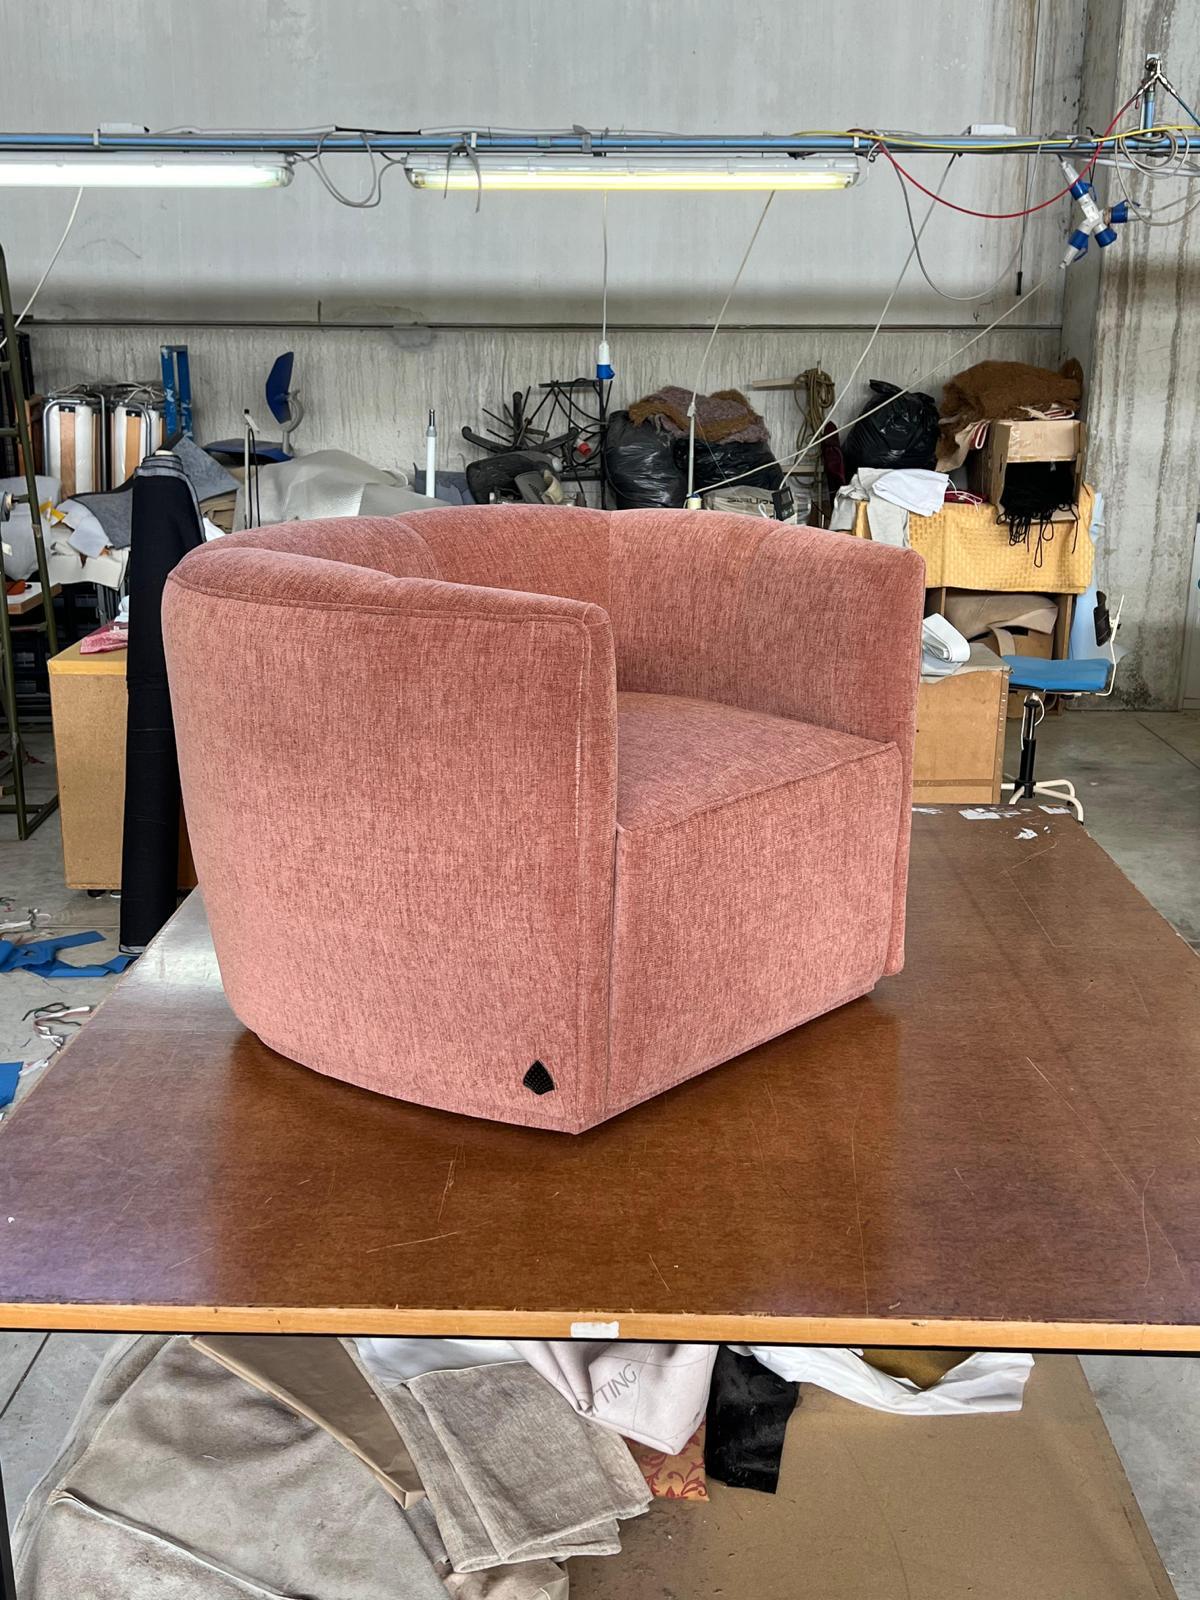 Its padding makes it extremely comfortable, just as its rounded shape turns it into a fantastic cockpit chair.

The piece is covered in fabric.
